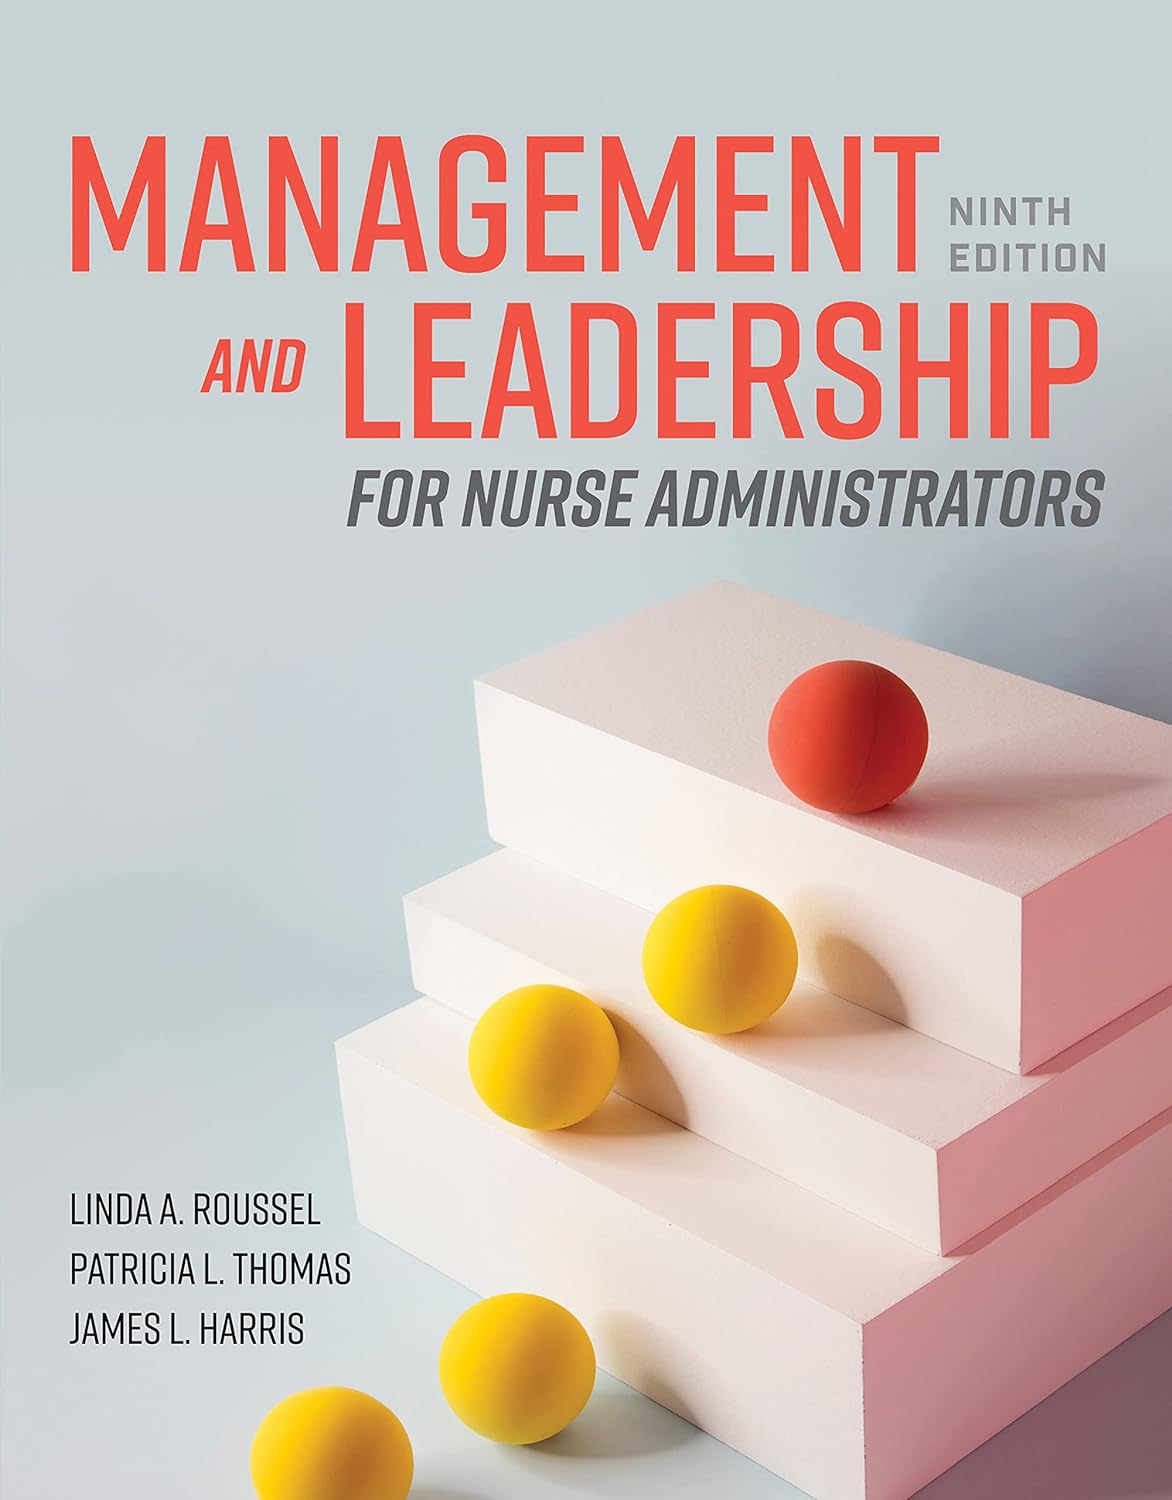 Management and Leadership for Nurse Administrators, 9th Edition  by Linda A. Roussel